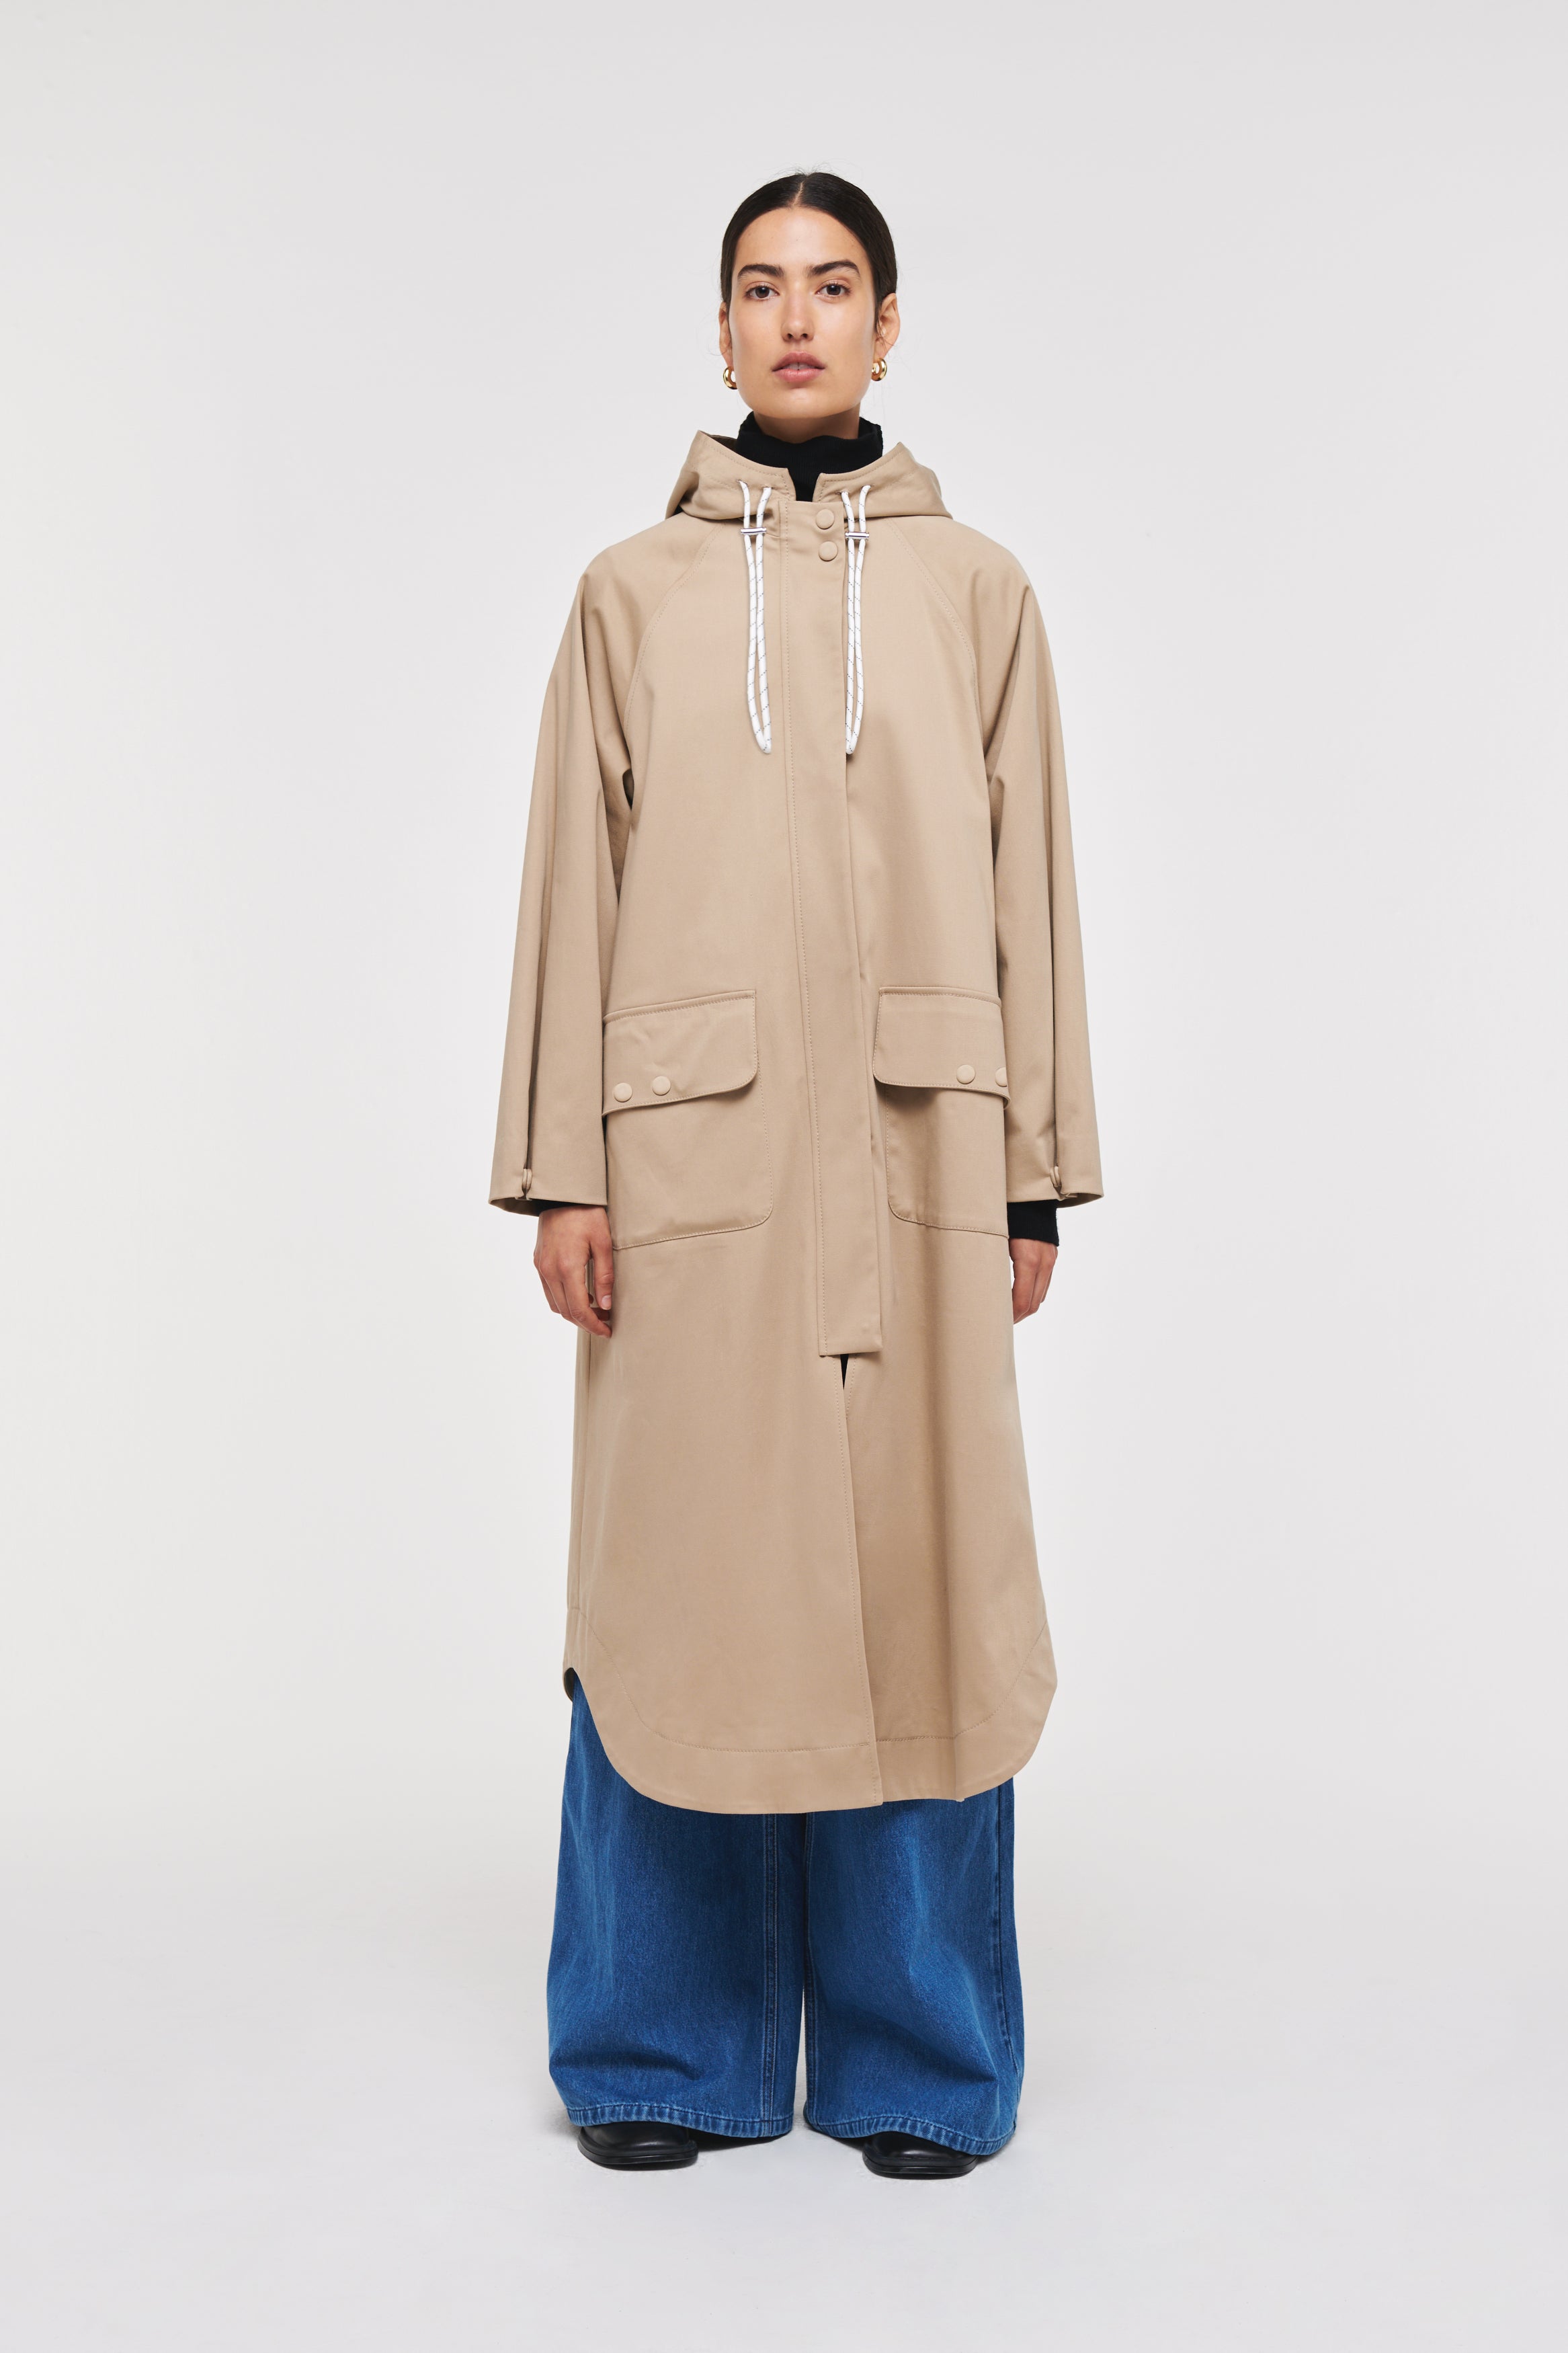 Aligne's Best-Selling Trench Coat Has Just Been Restocked | Who What ...